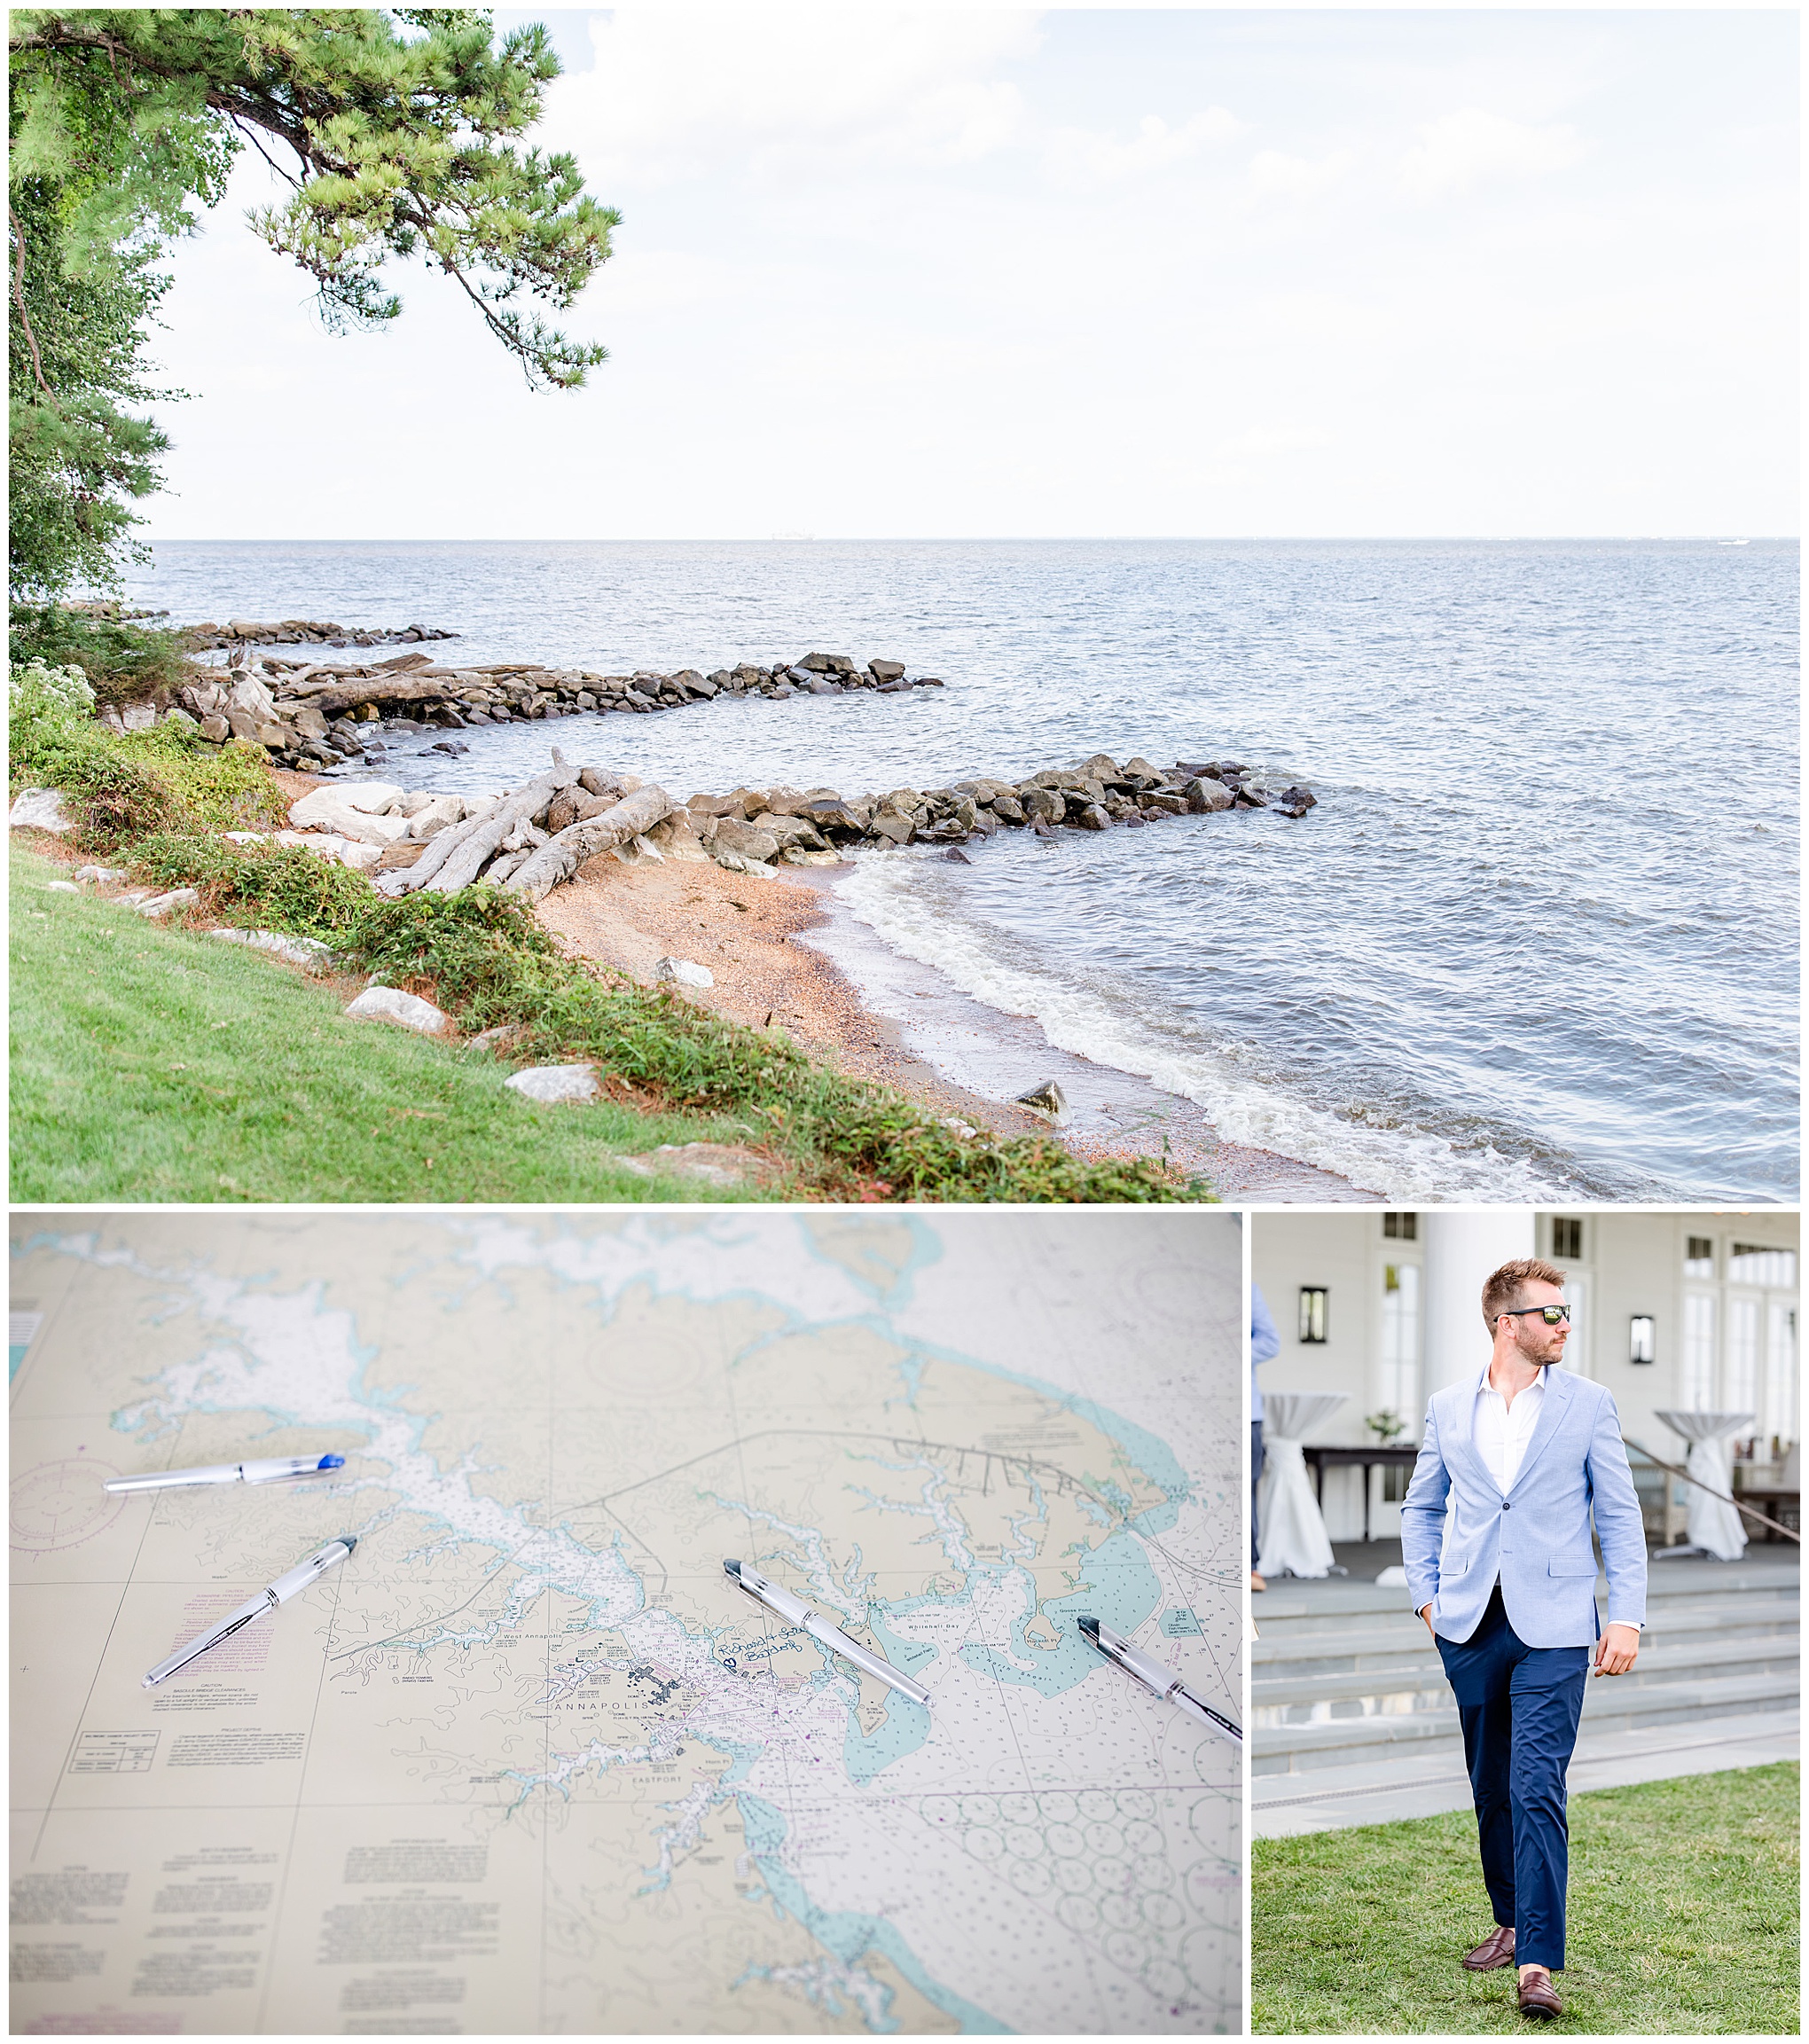 Nantucket inspired Gibson Island Club wedding, nautical wedding inspiration, Annapolitan wedding inspiration, Gibson Island Club wedding photography, Gibson Island Club wedding photographer, Annapolis wedding photographer, Baltimore wedding photographer, Maryland wedding photographer, nautical aesthetic, Annapolis wedding inspiration, Rachel E.H. Photography, shore scenery, wedding guest with sunglasses, map of boats